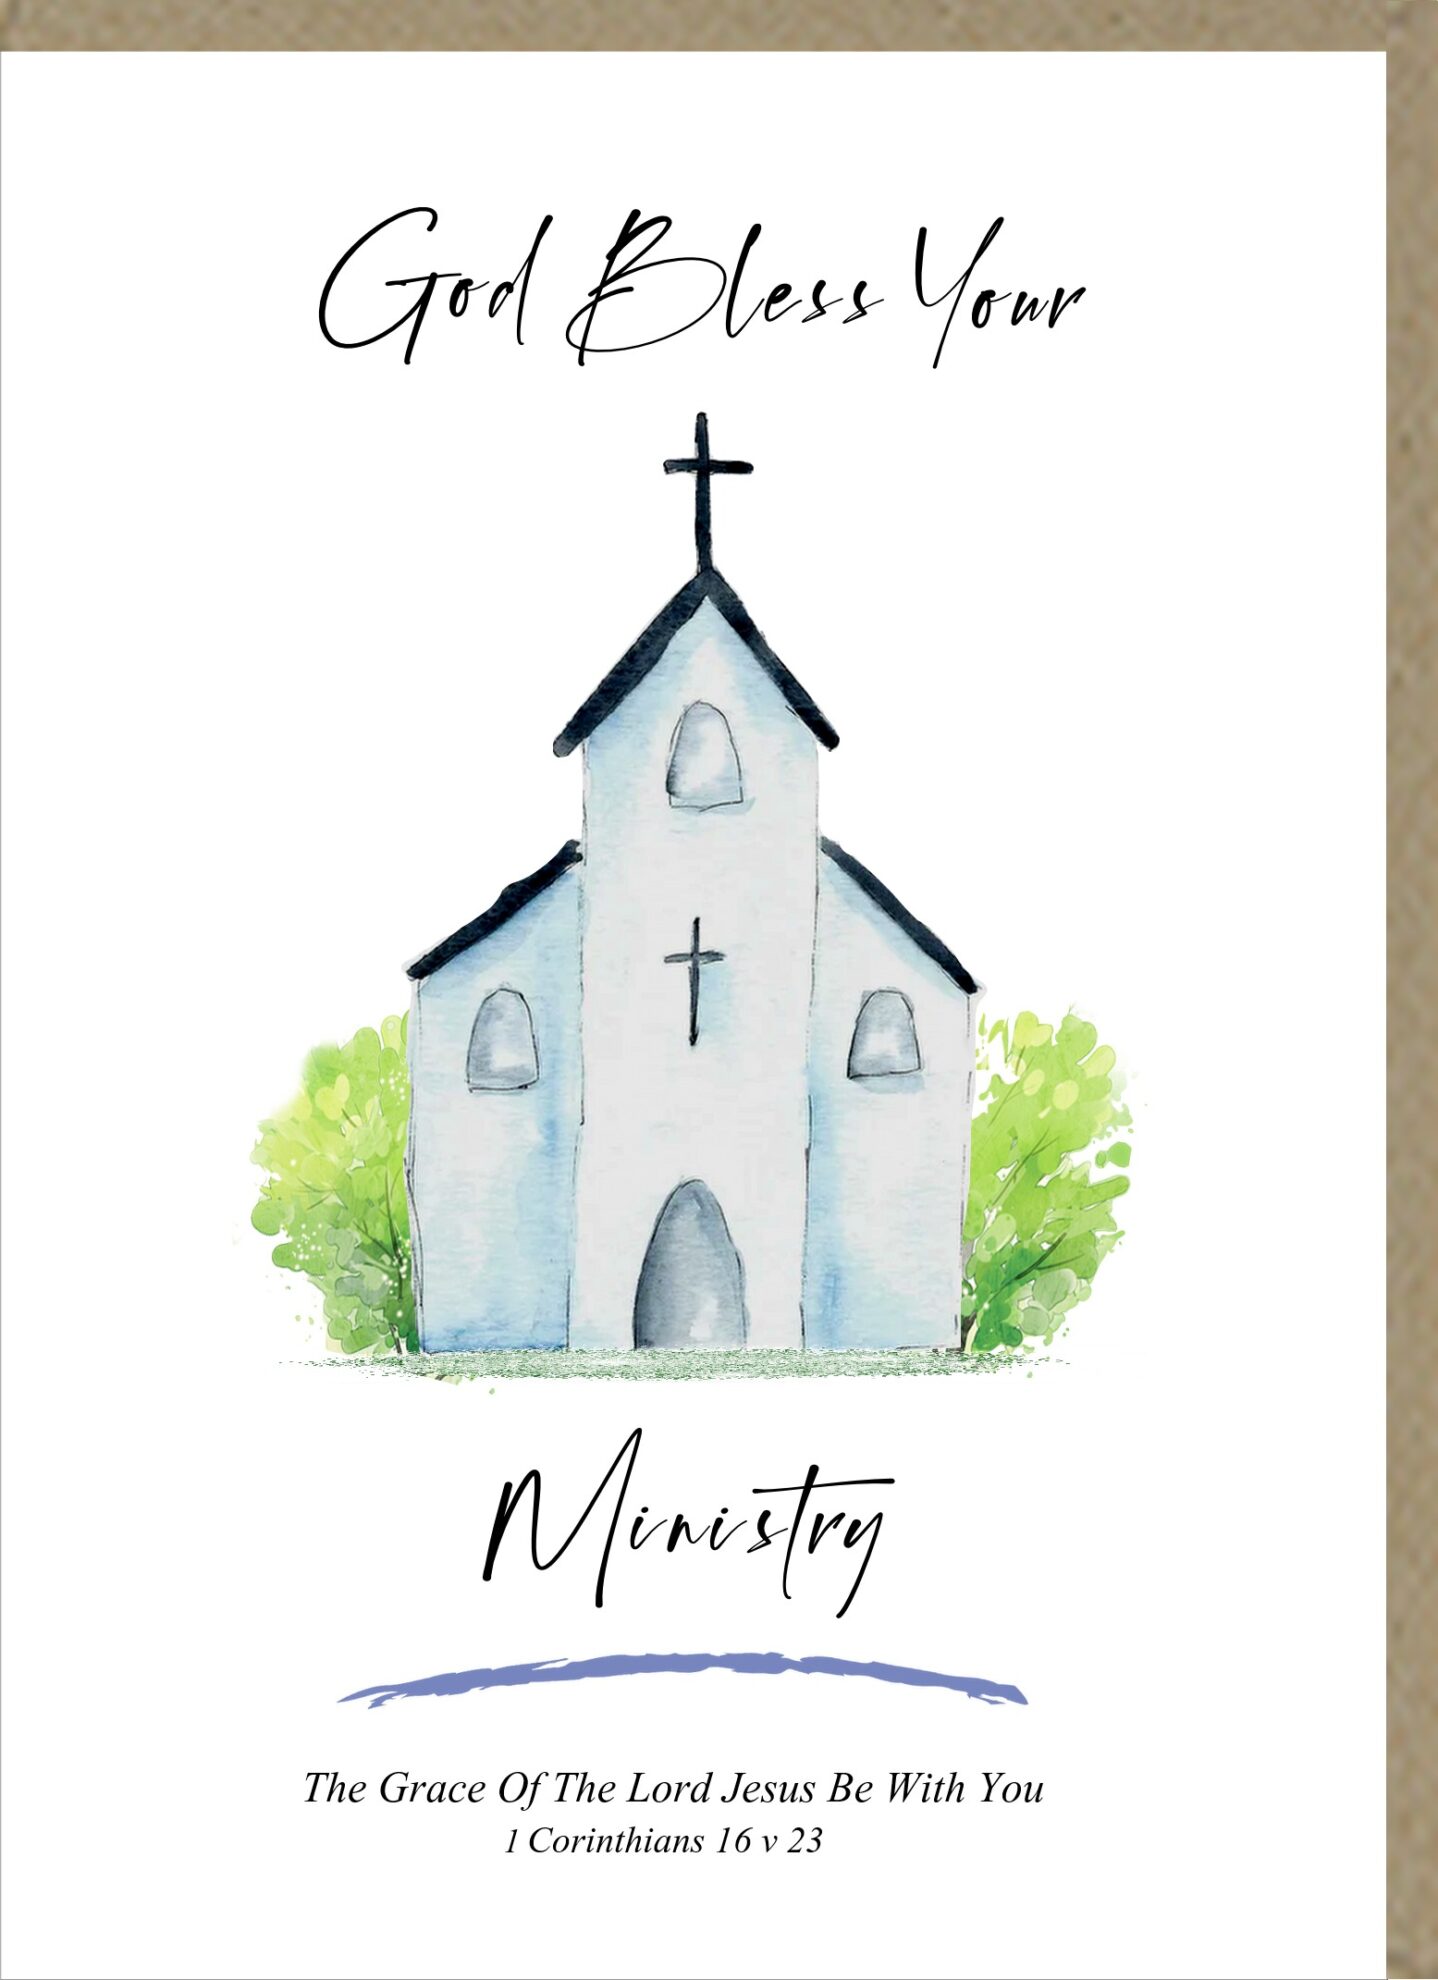 GOD BLESS YOUR MINISTRY GREETINGS CARD  